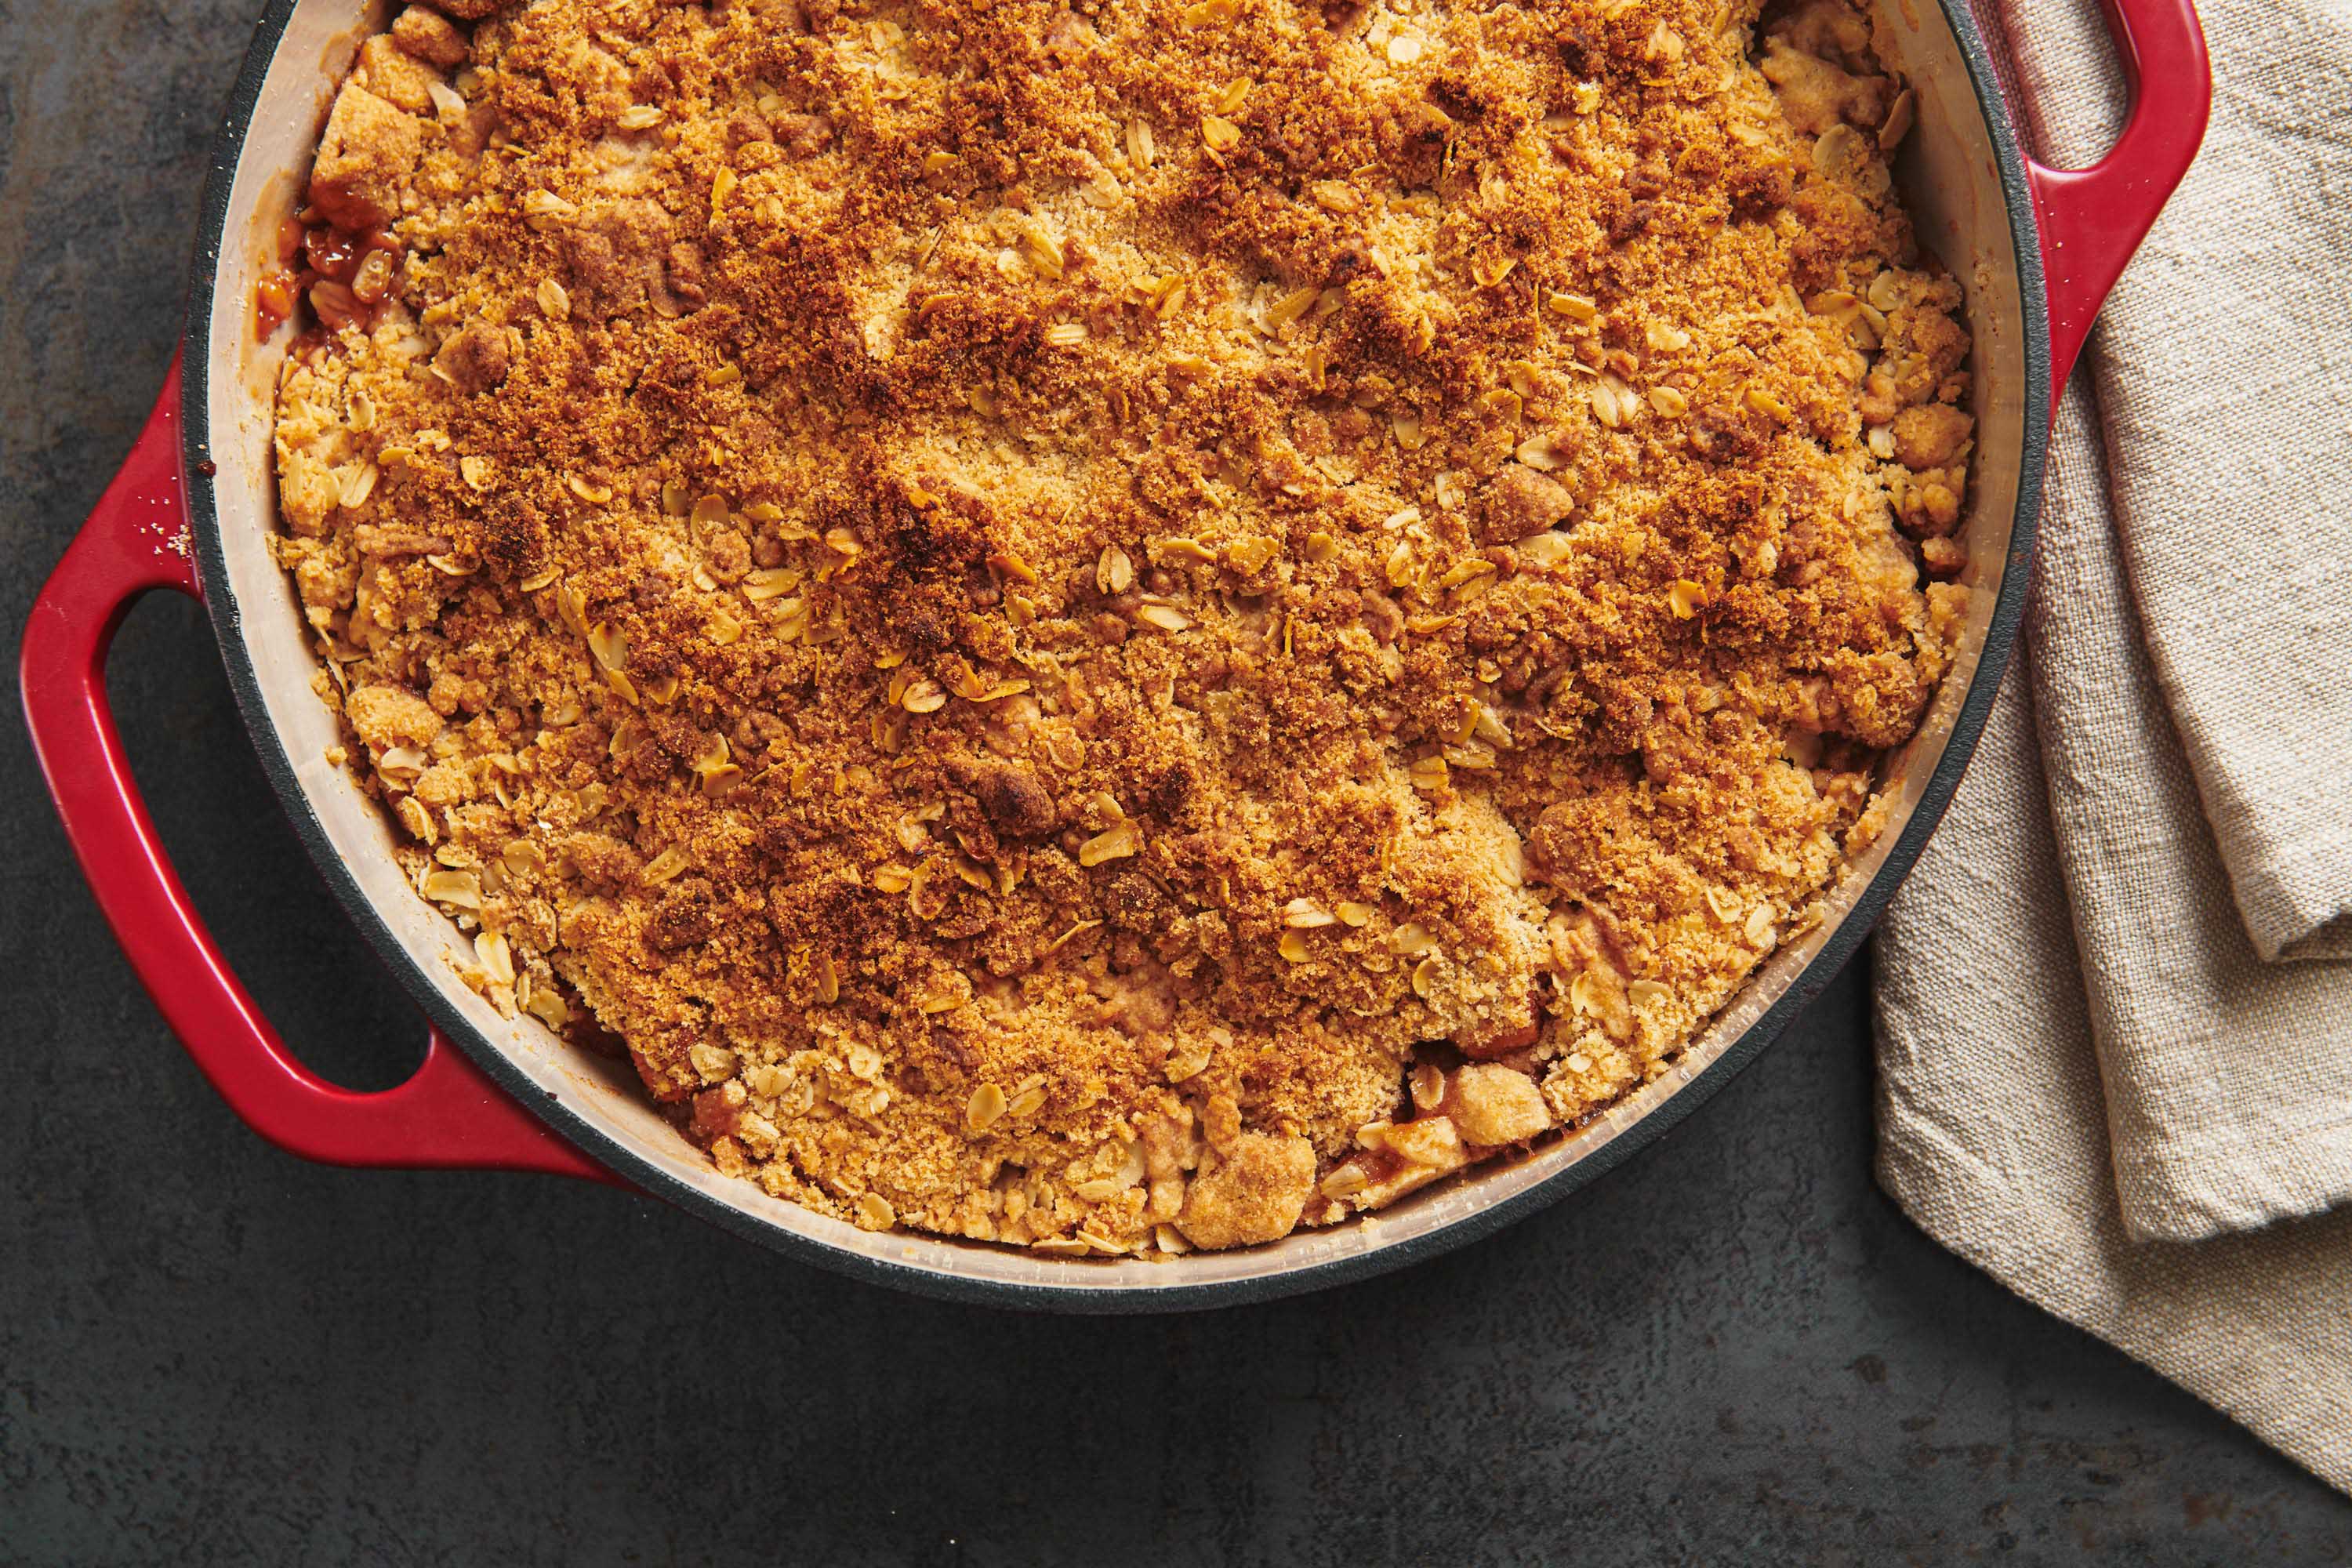 Baked streusel apple crisp in red dish on table.